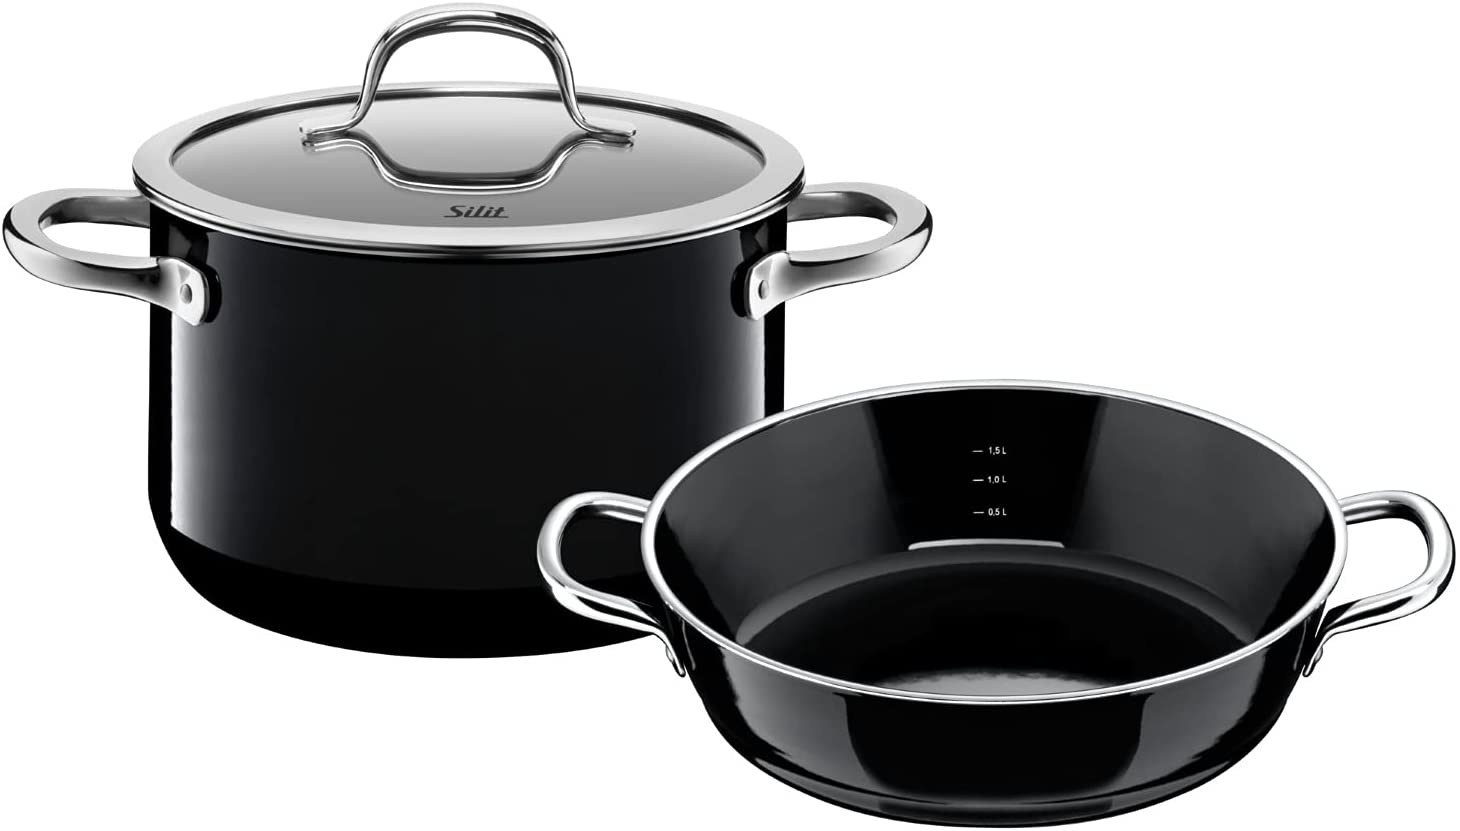 Silit Passion Black 2-piece cookware set, meat pot and pan Silargan functional ceramics, glass lid pouring rim, suitable for induction, black